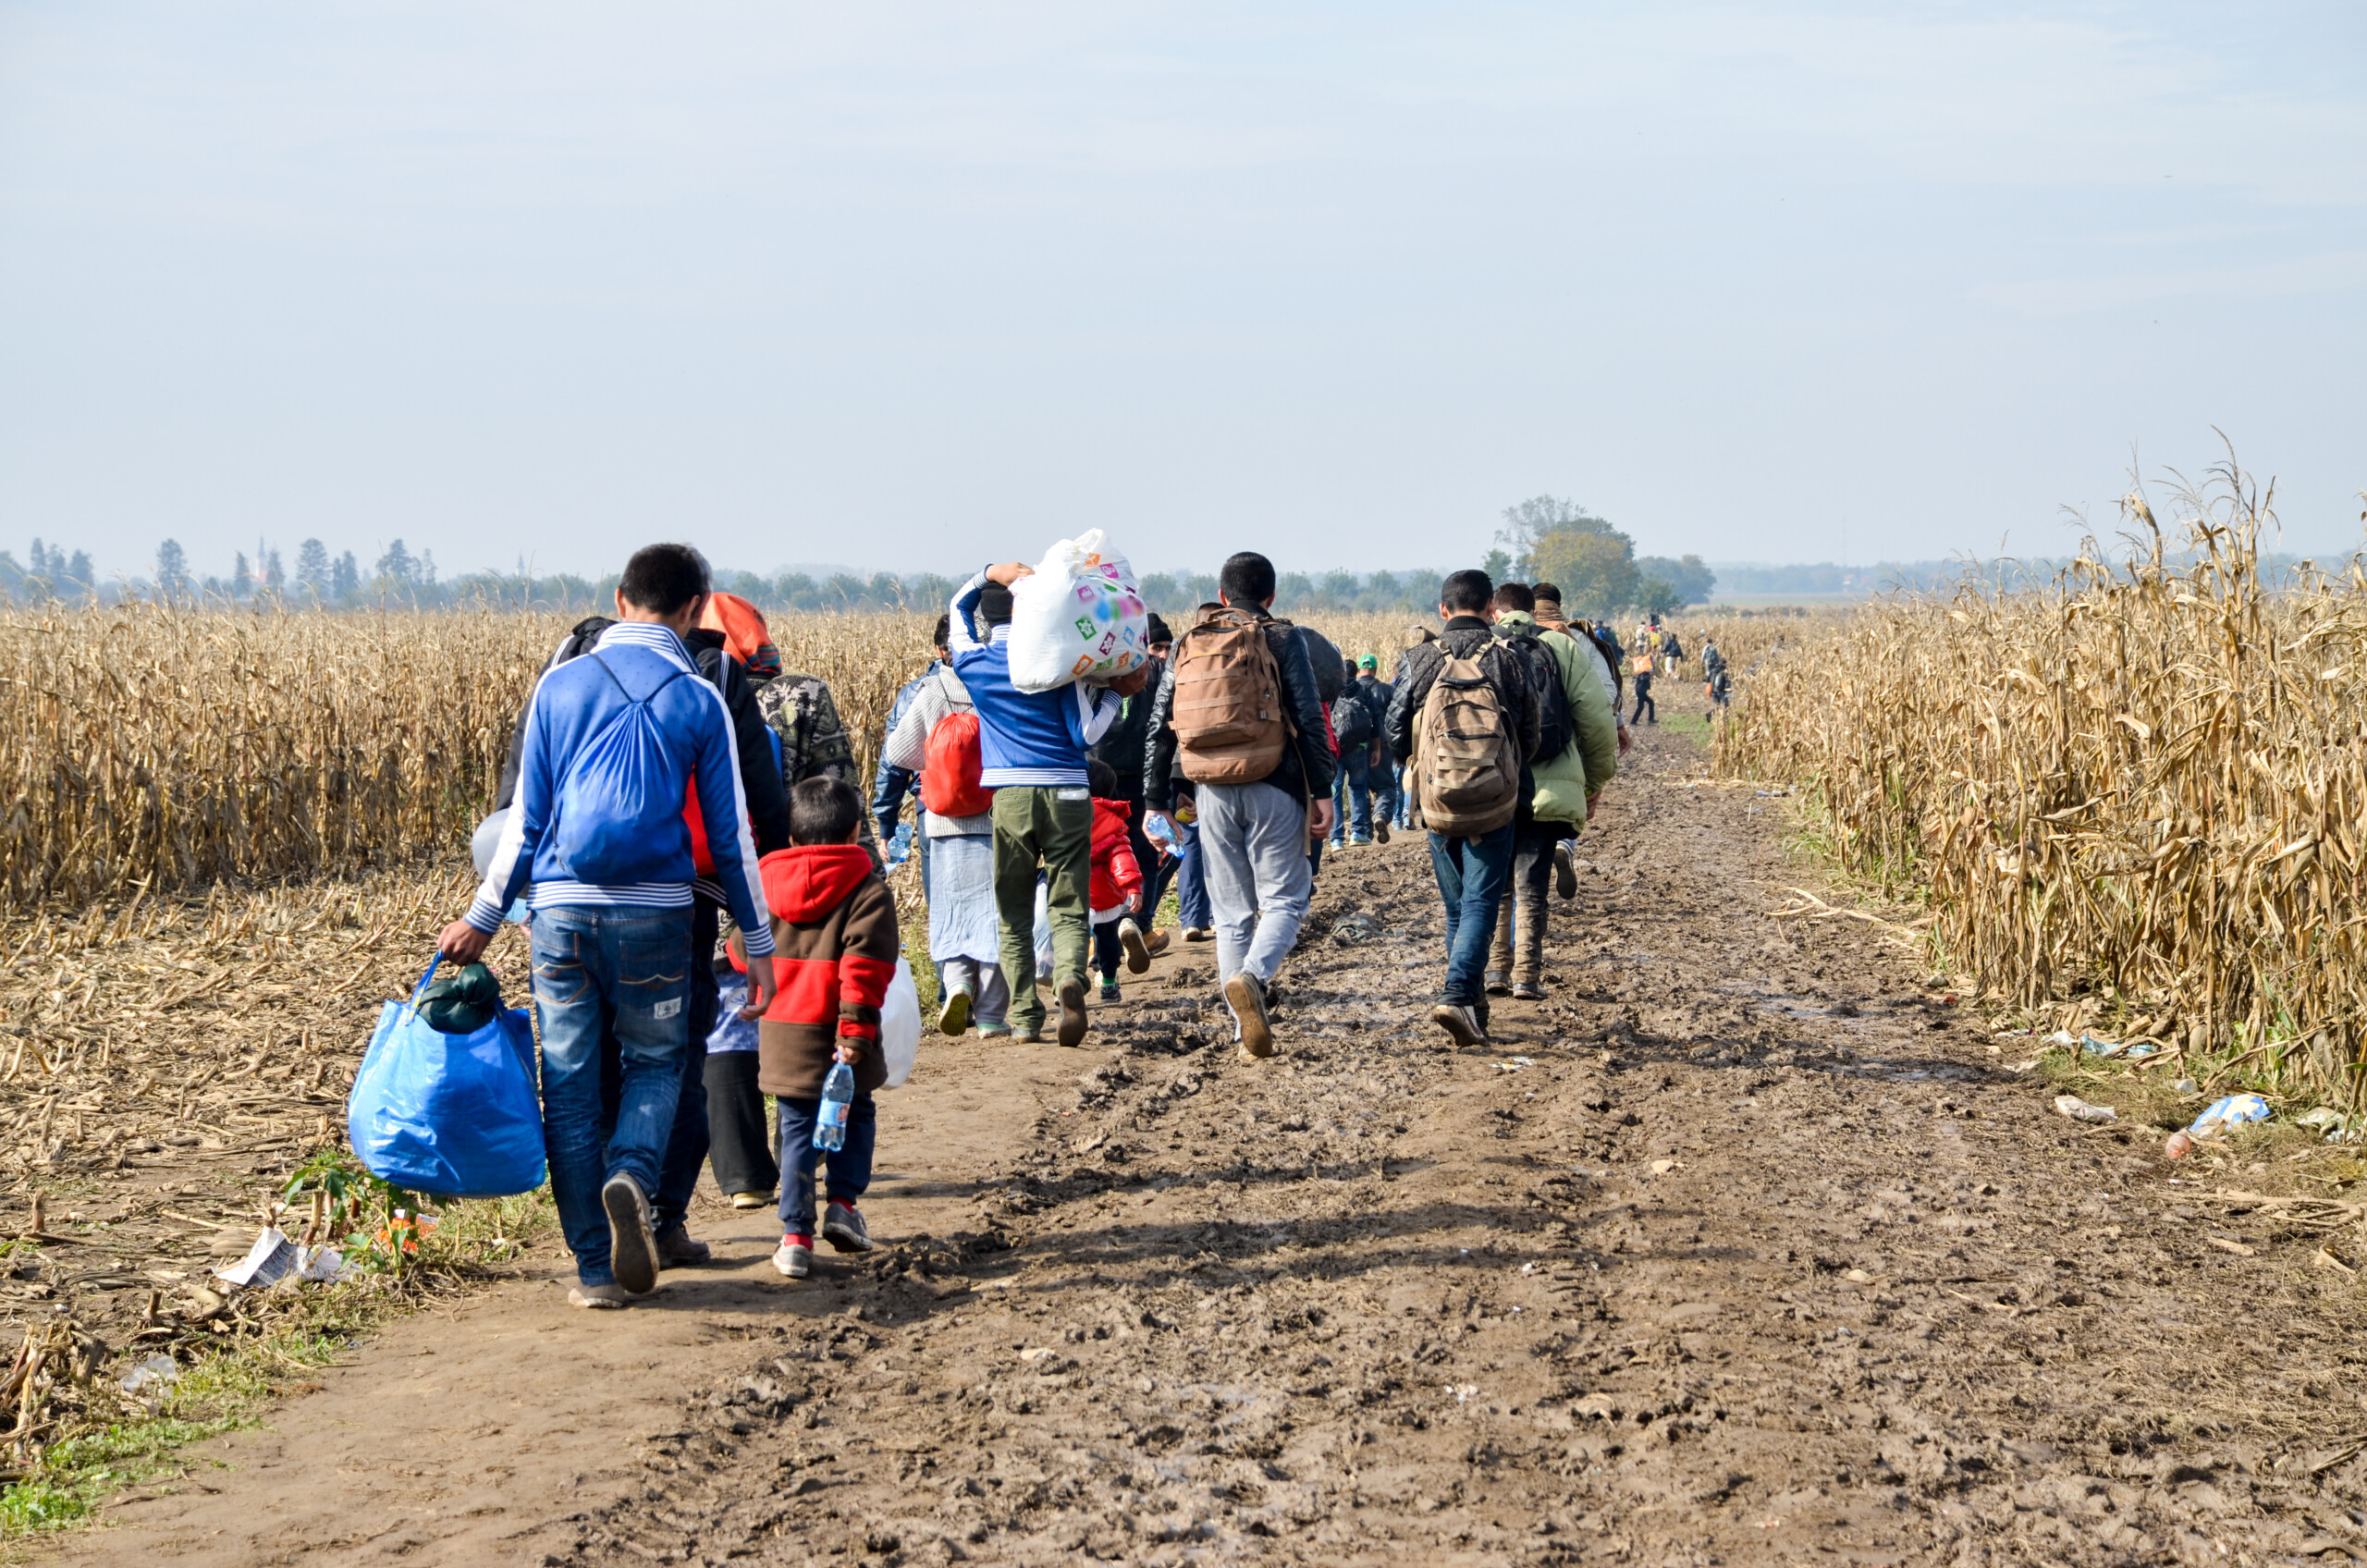 Group of War Refugees walking in cornfield. Syrian refugees cros